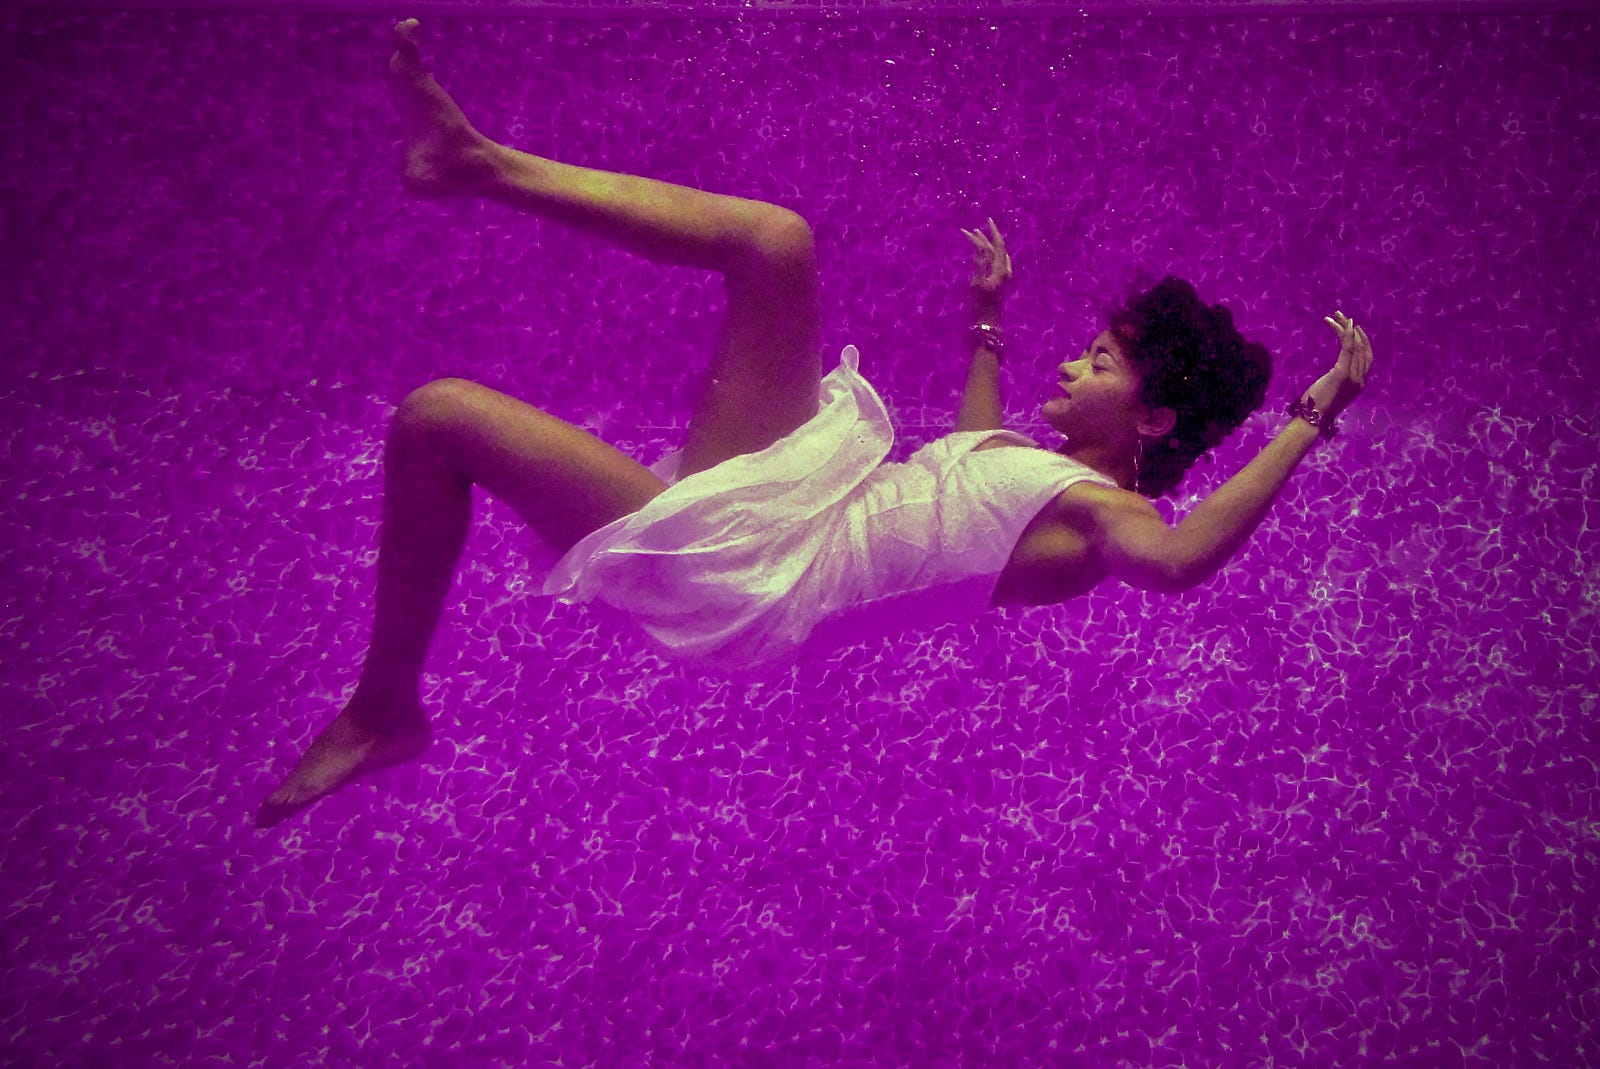 A woman floats downward as she assumes a supine position, arms raised. Our understanding of REM sleep’s relationship with dreaming has also evolved. While it was once thought that dreams only occurred during REM sleep, it is now known that dreams can occur during other sleep stages, albeit with different characteristics.